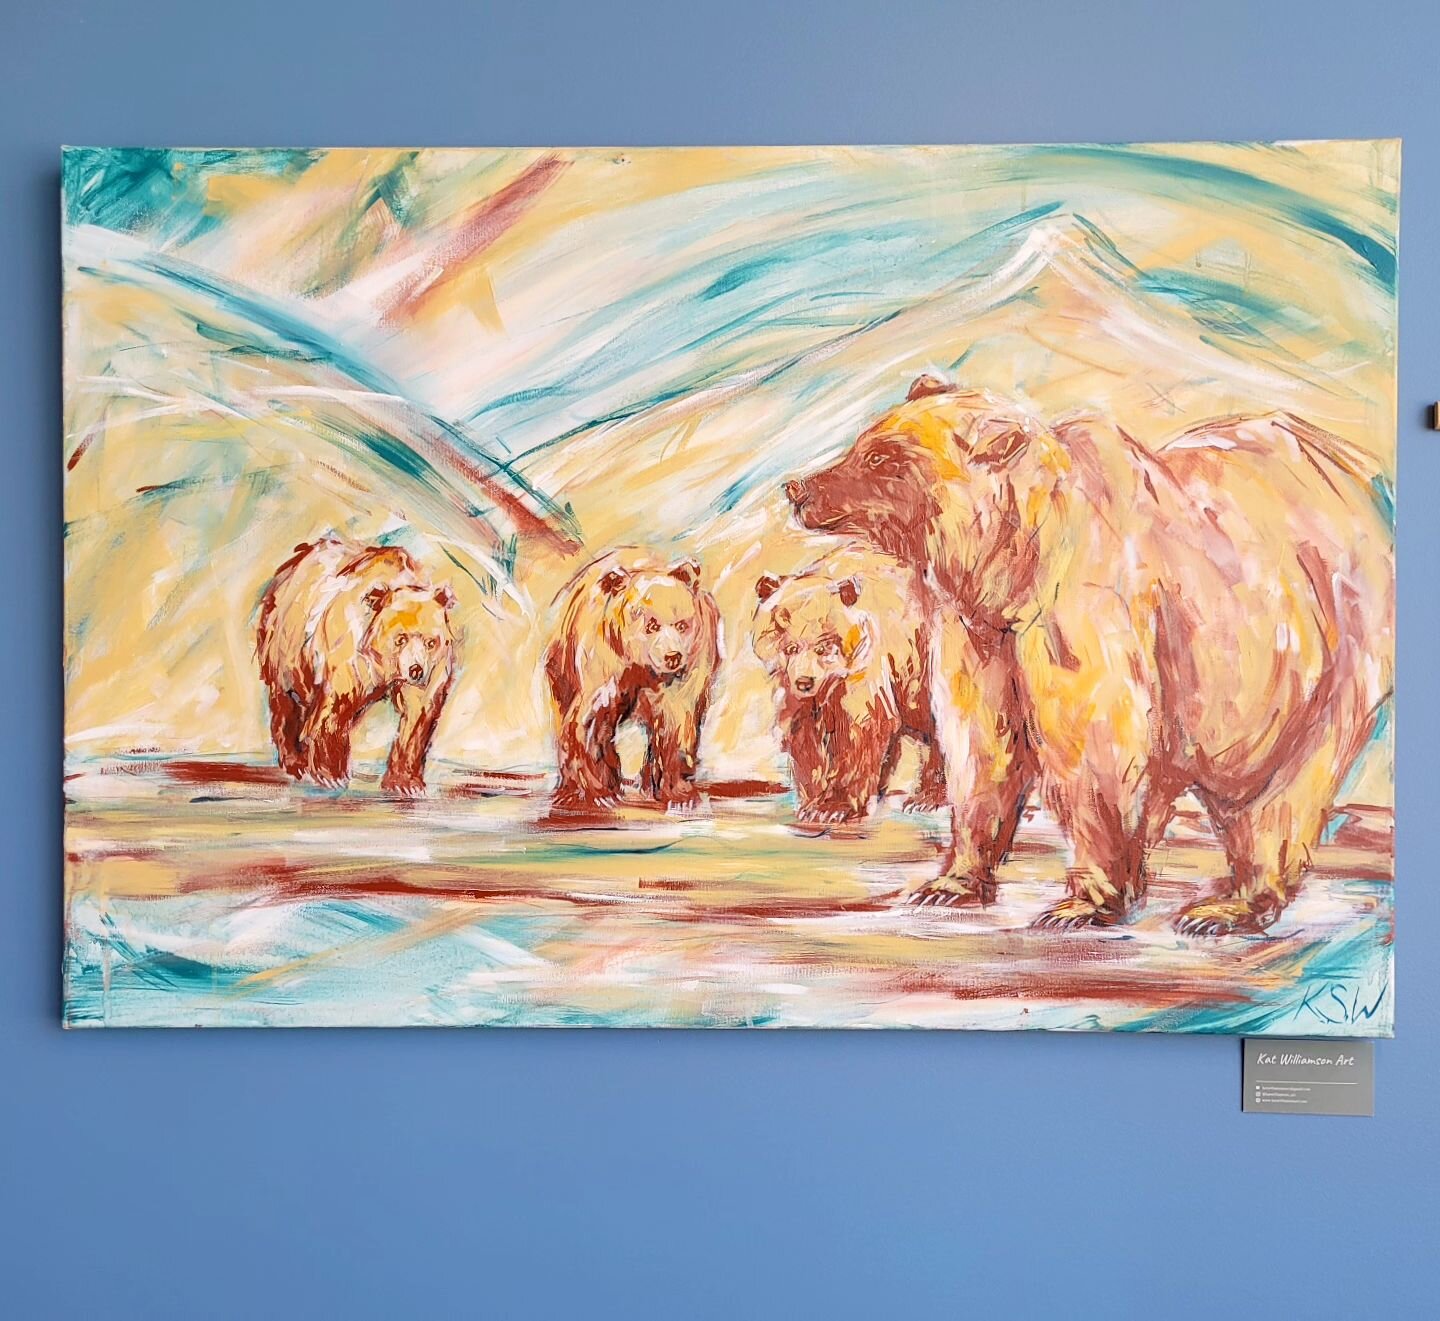 🔴 Very happy that this family have officially found their forever home at @mountainsportclinic ! 

#wildlifeartist #wildlifeart #nelsonartist #kootenayartist #kootenayart #bearpainting #grizzlybearpainting